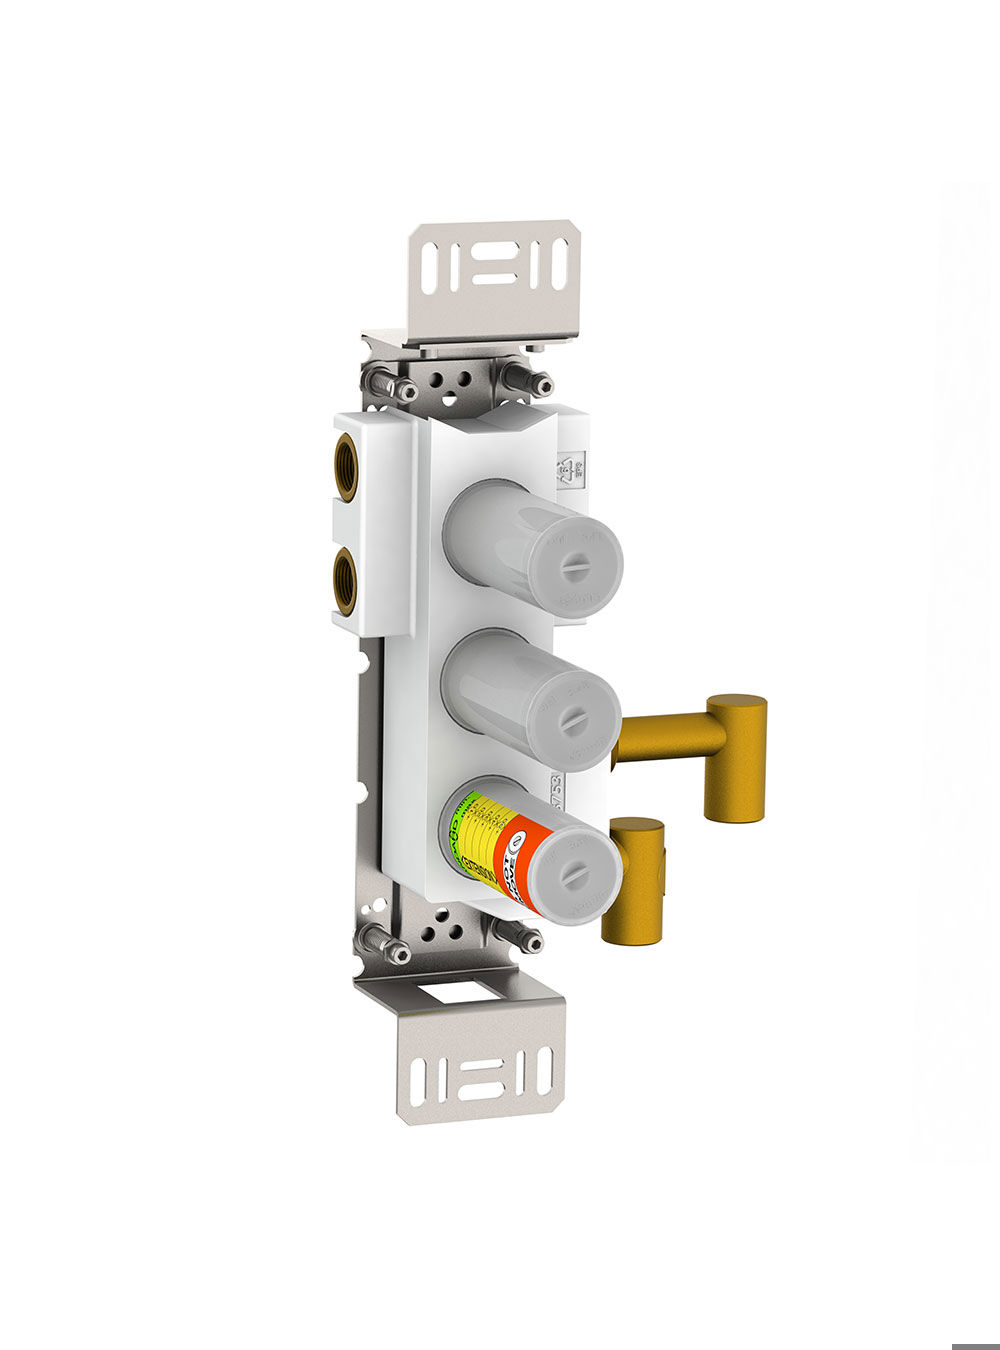 5600VA3: Thermostatic mixer with 3-way diverter for vertical mounting.¾" connection to copper, steel, iron or